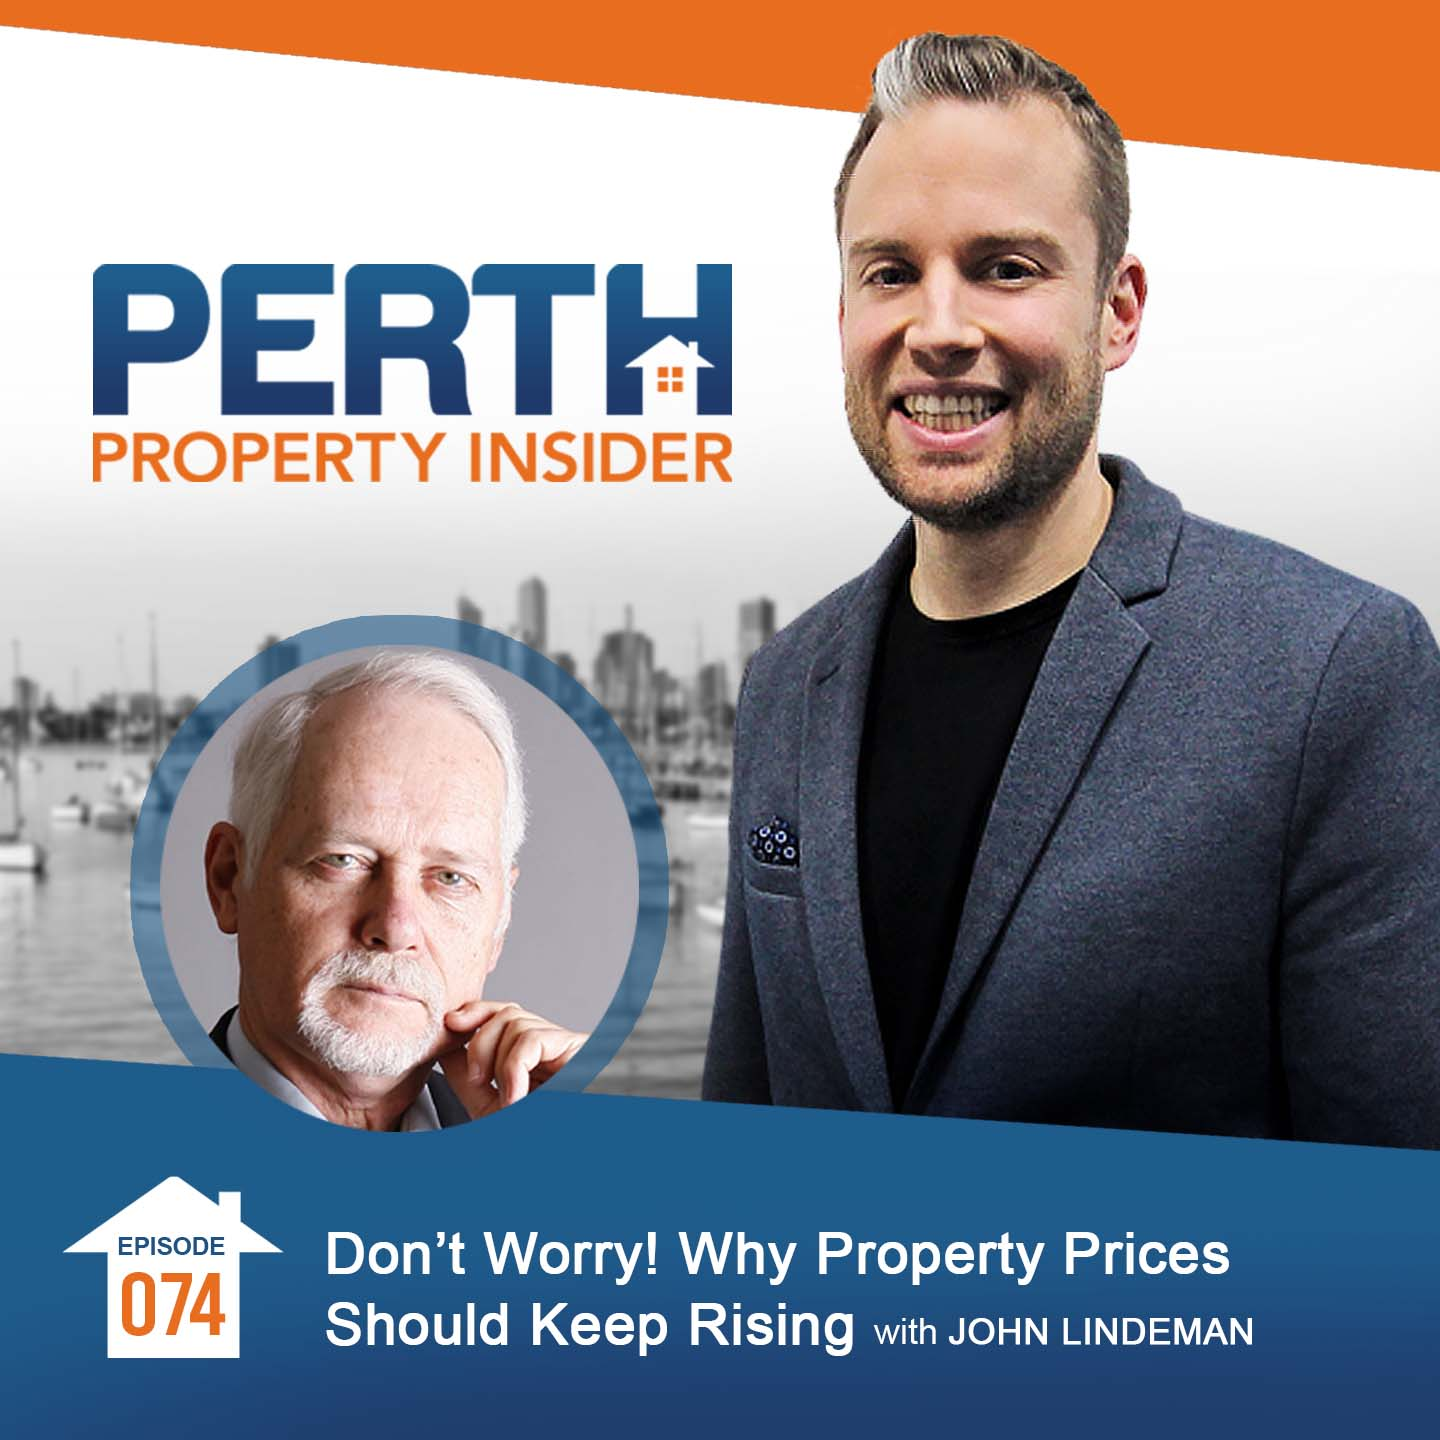 Episode 74: Don’t Worry! Why Property Prices Should Keep Rising with John Lindeman